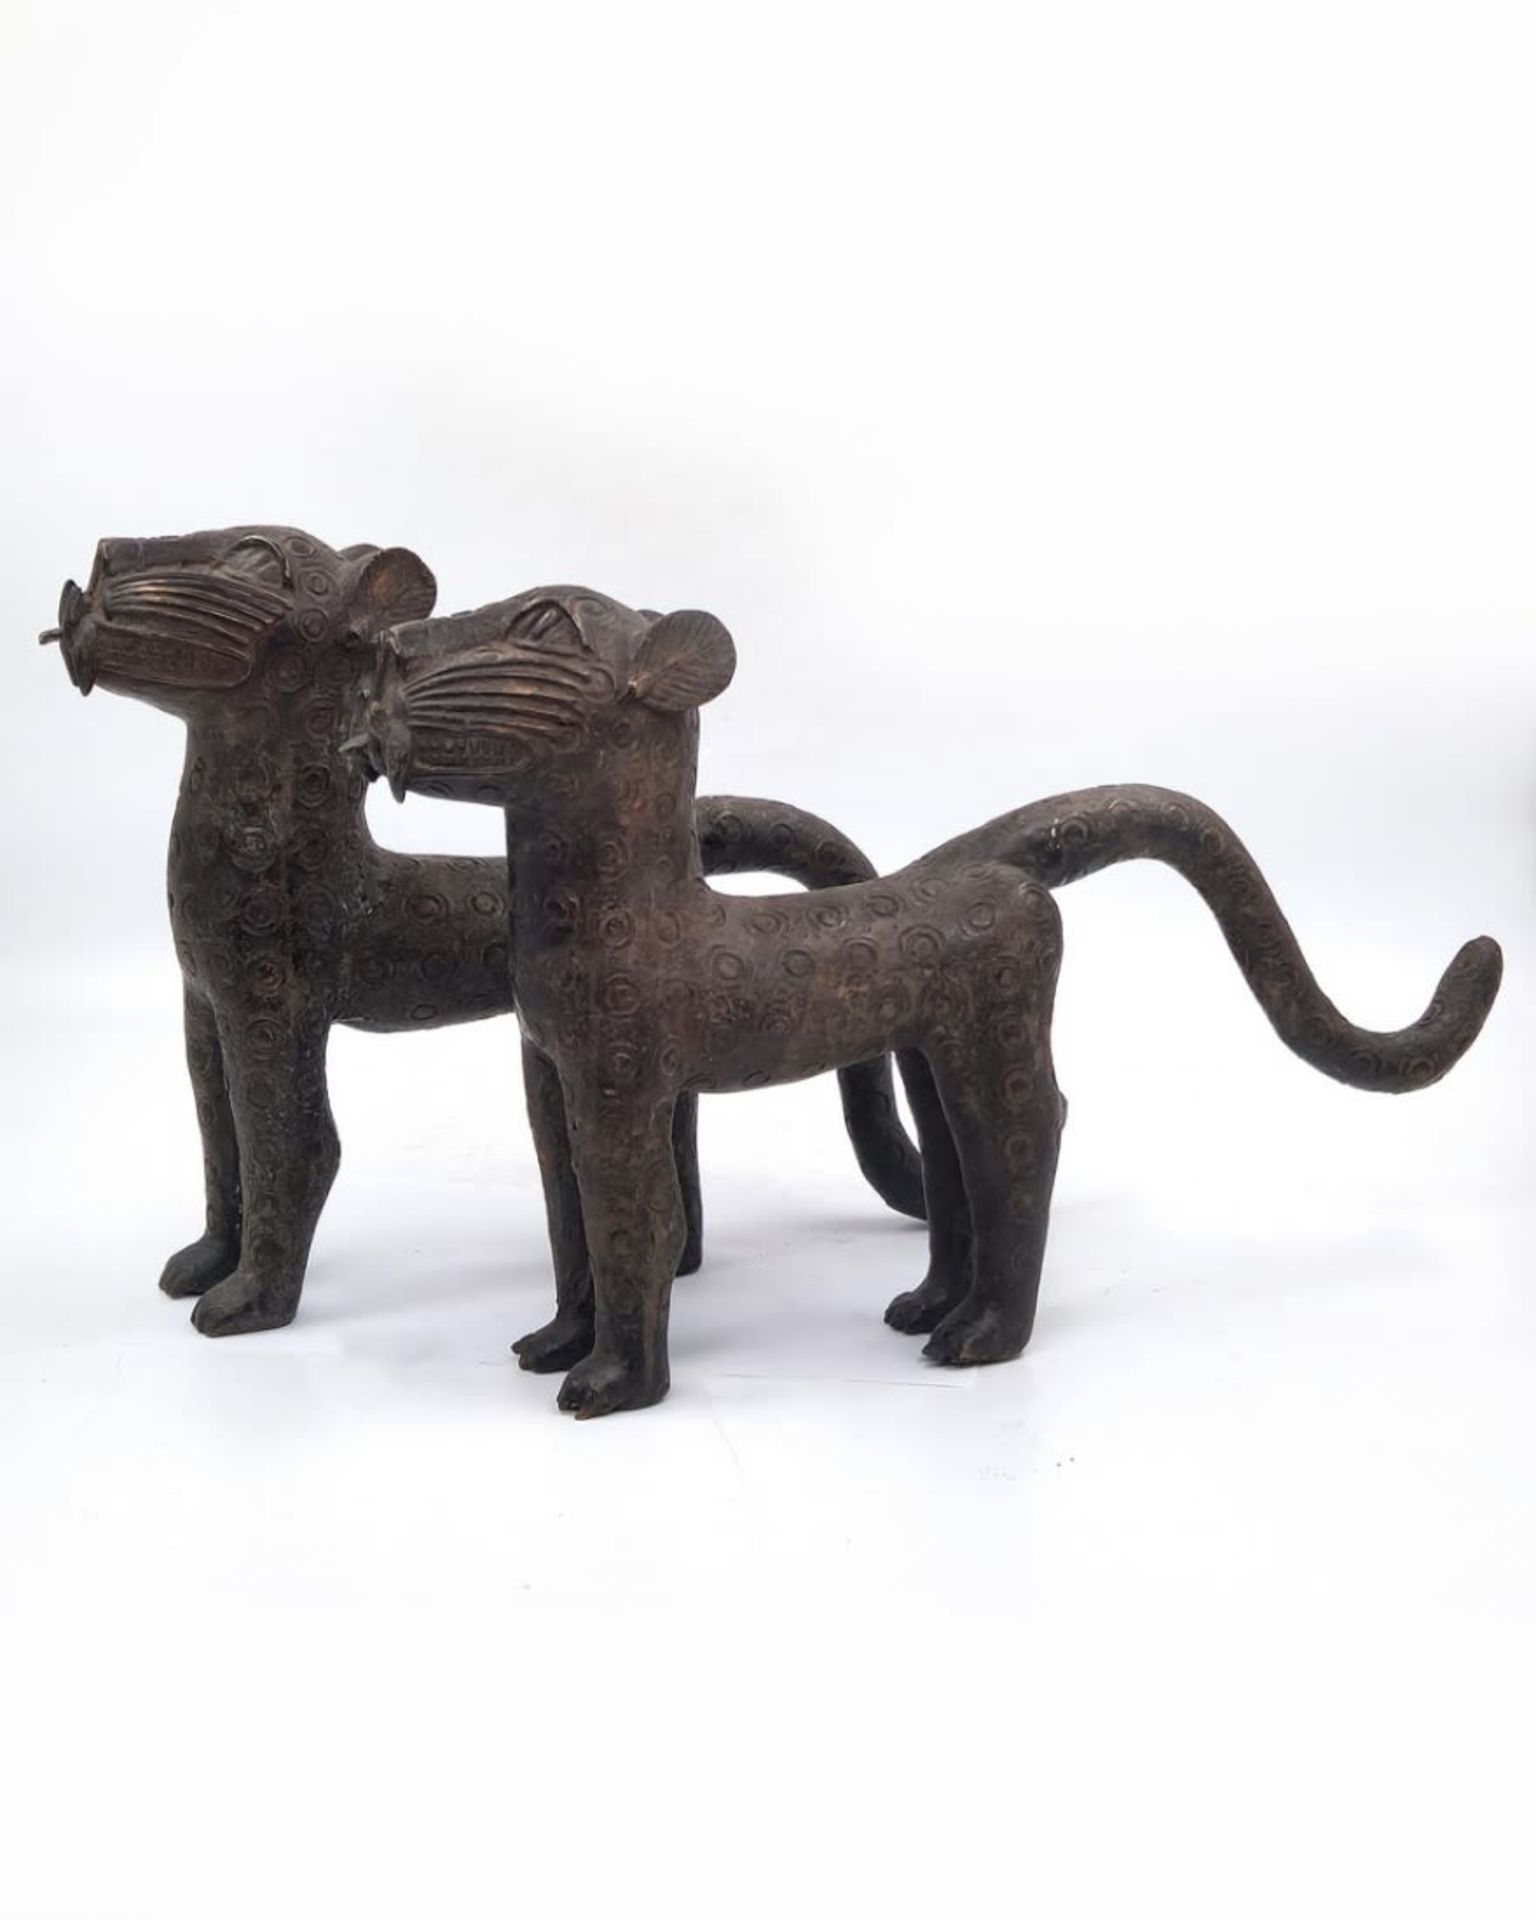 A pair of antique African statues, around hundred years old, in the form of panthers, made in ' - Image 5 of 8